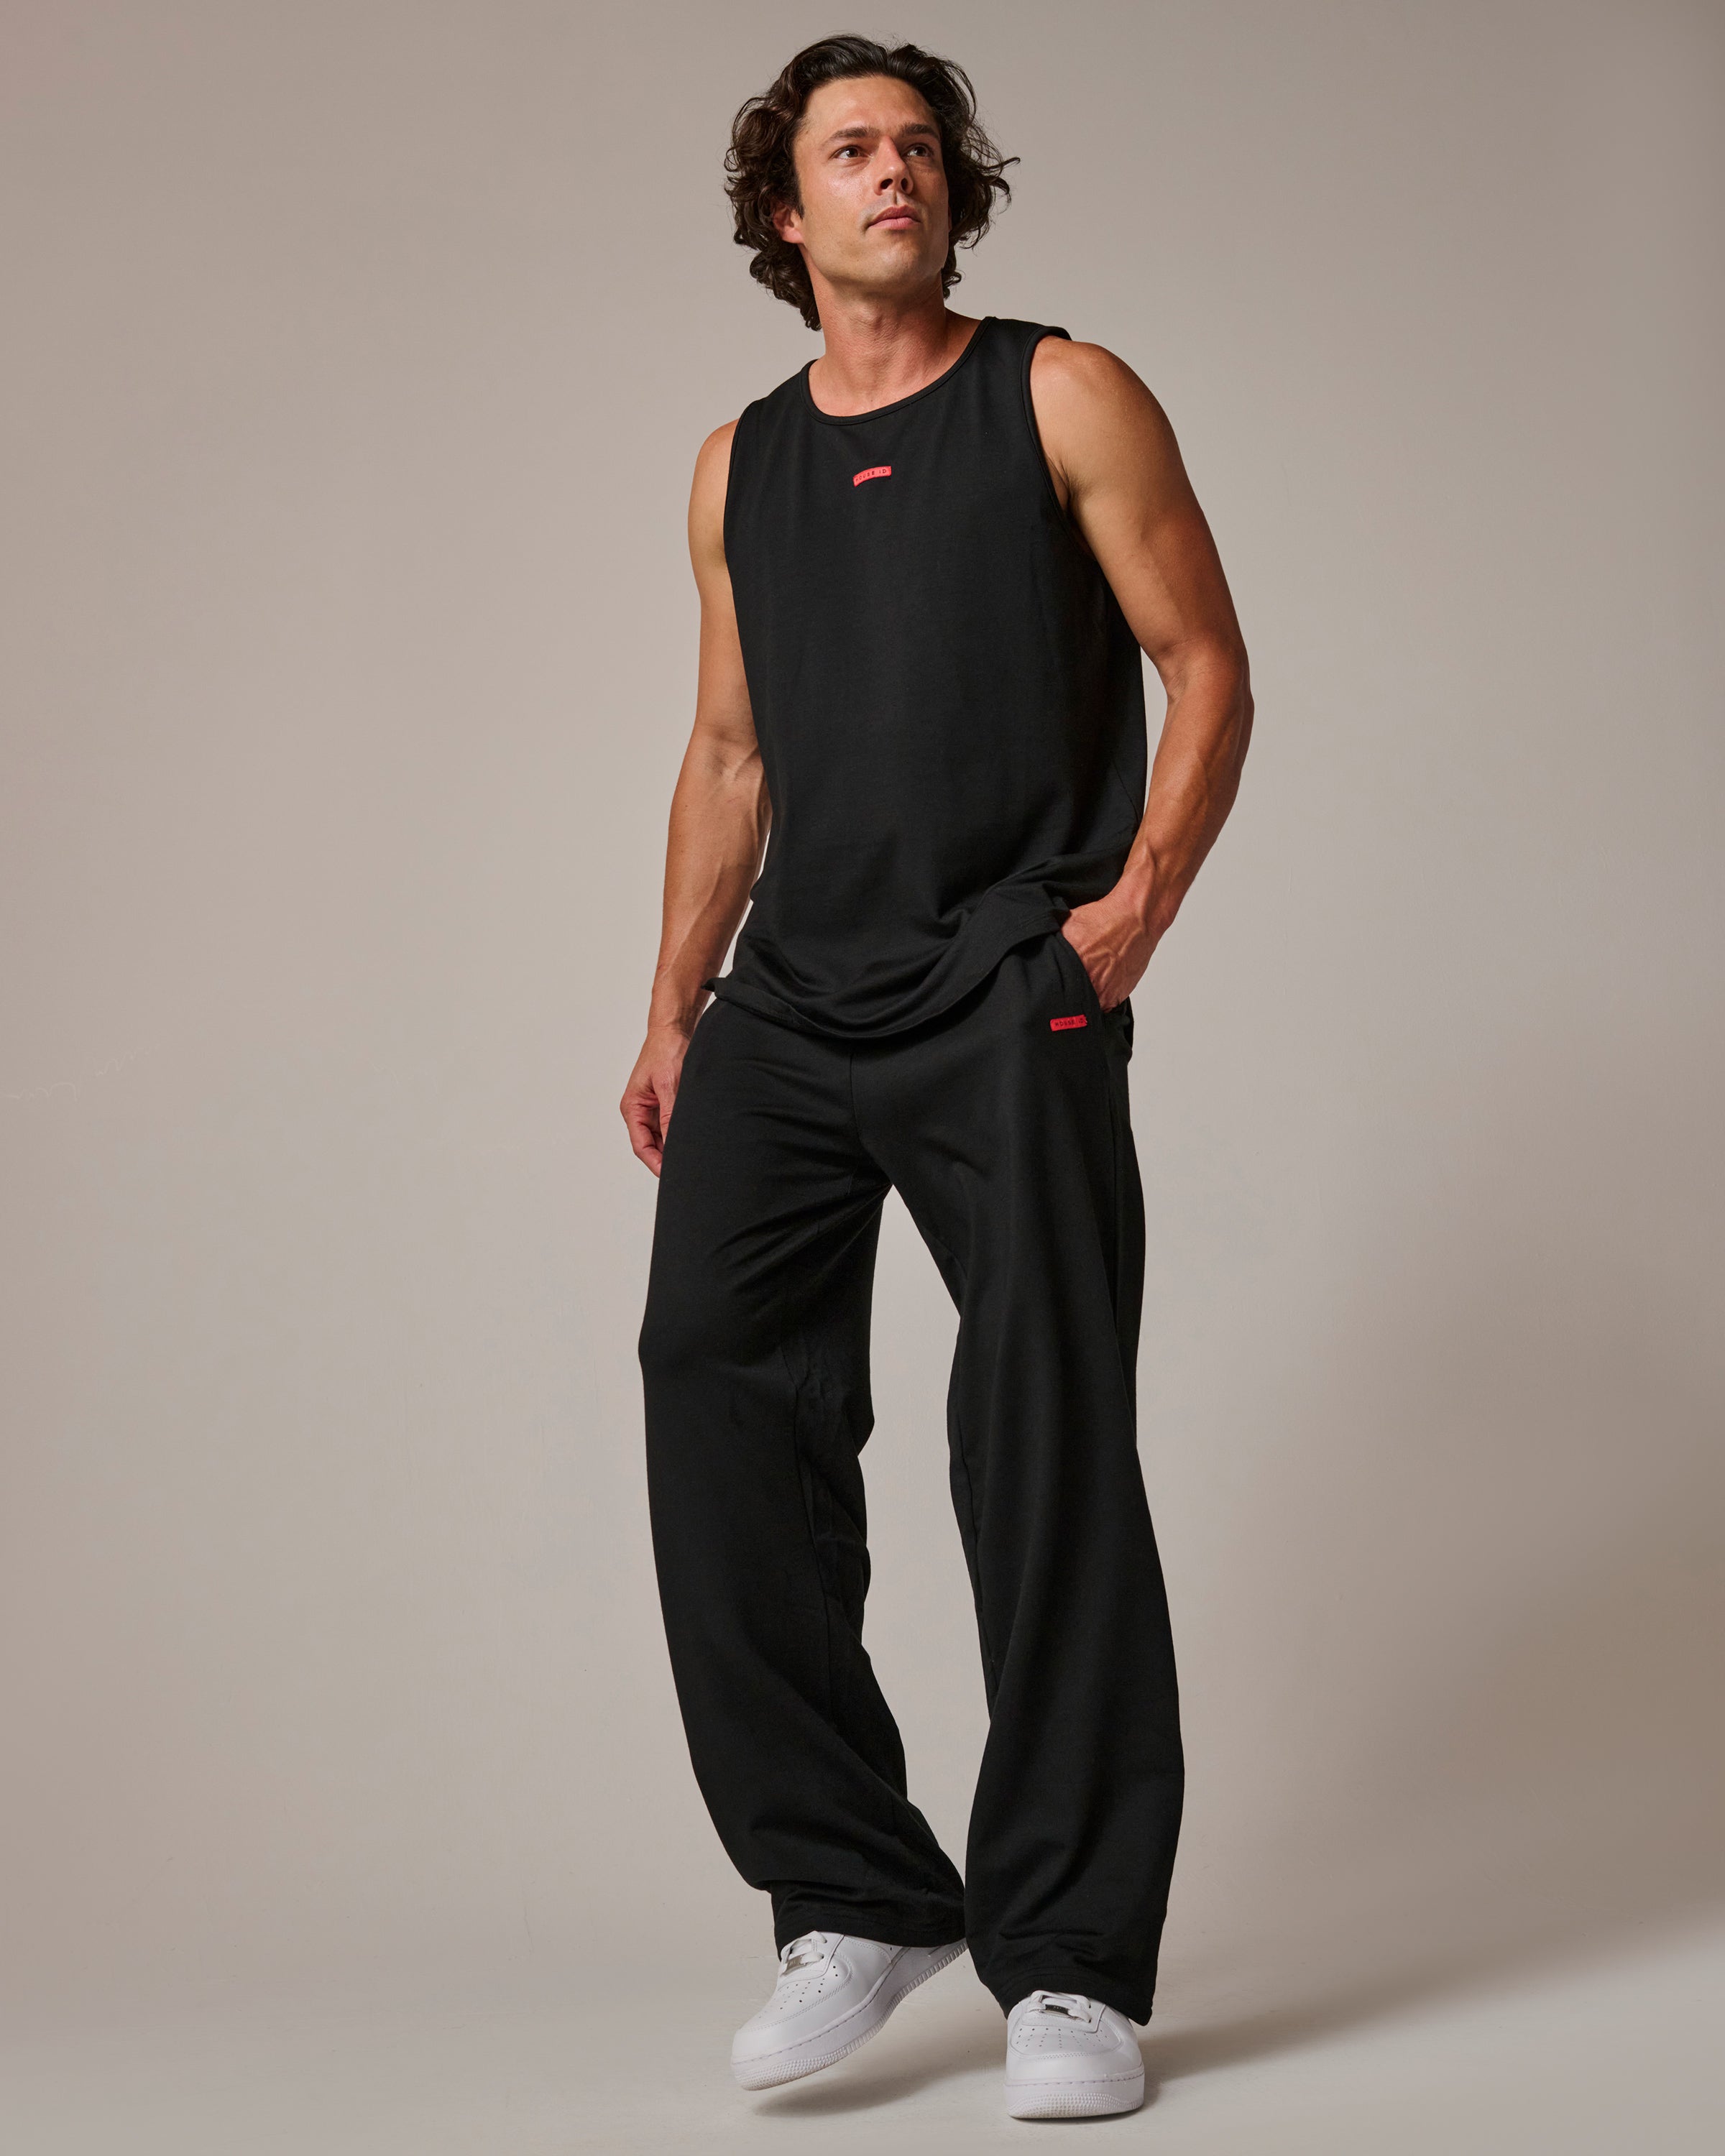 Jersey Pant in Black